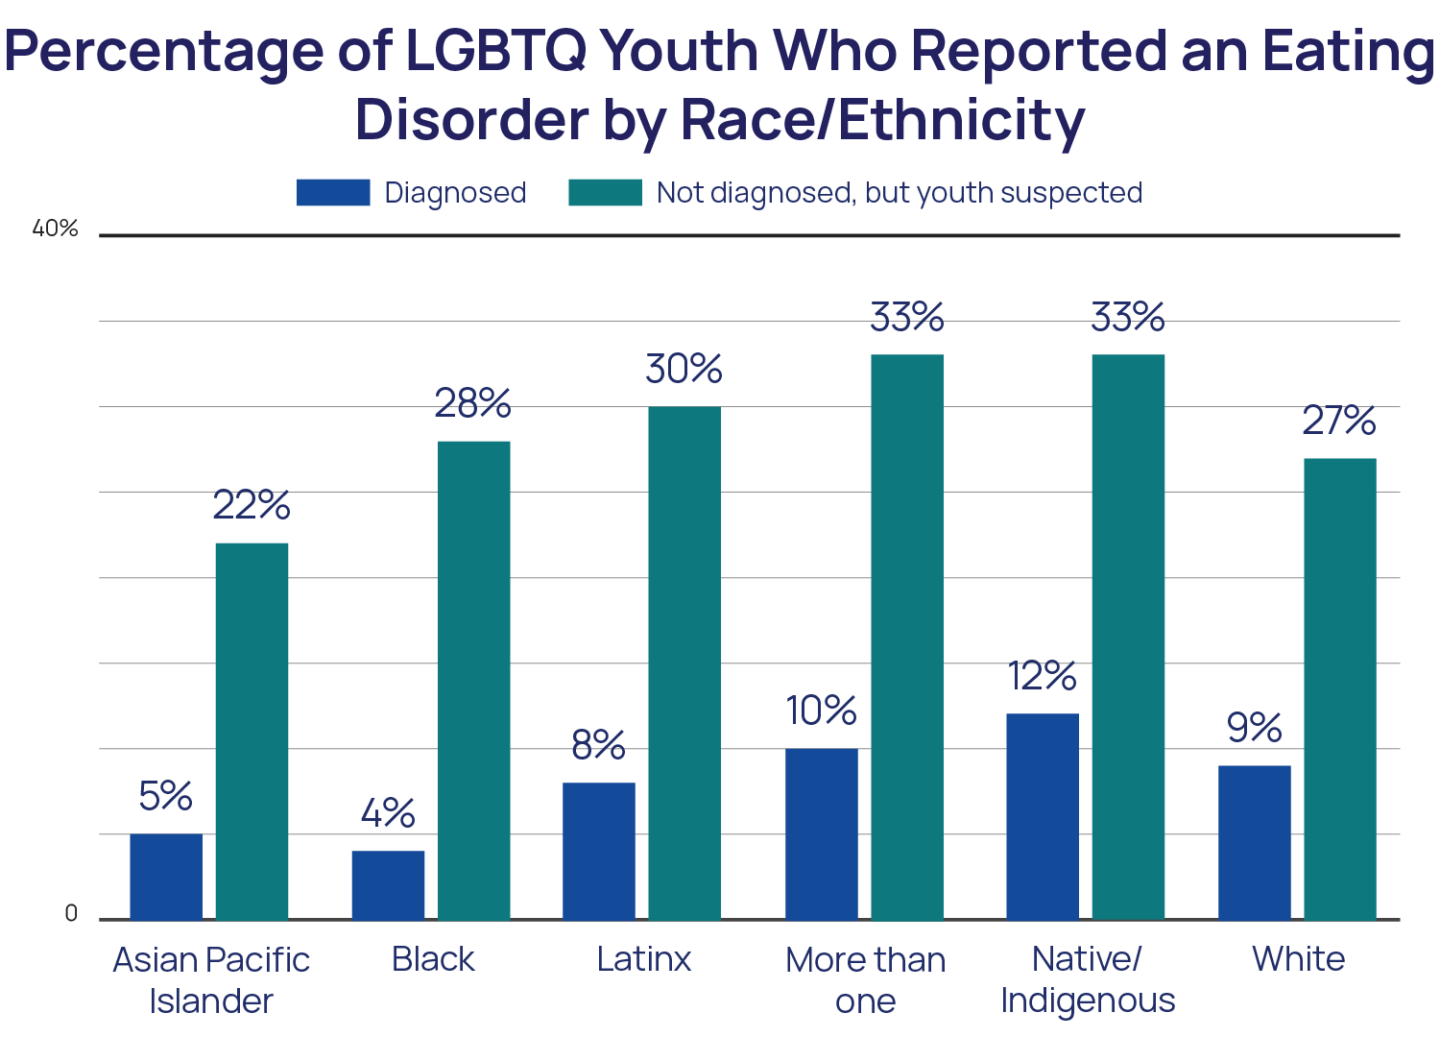 Percentage of LGBTQ Youth who Reported an eating disorder by Race/Ethnicity